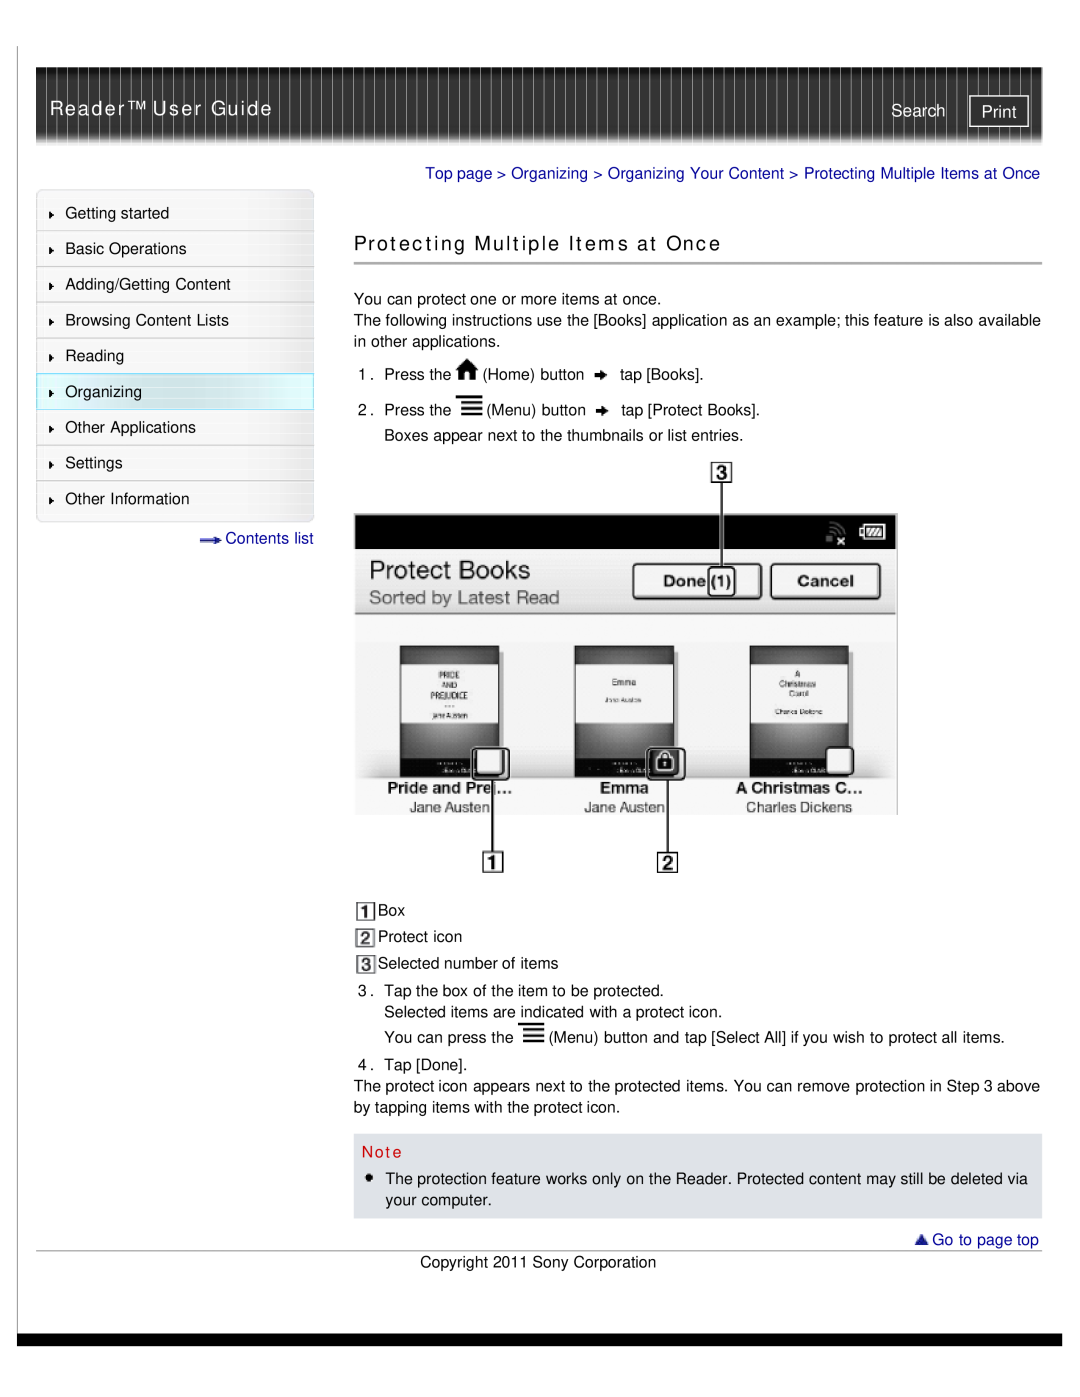 Sony PRS-T1RC manual Protecting Multiple Items at Once, Reader User Guide, Search, Print, Contents list, Go to page top 